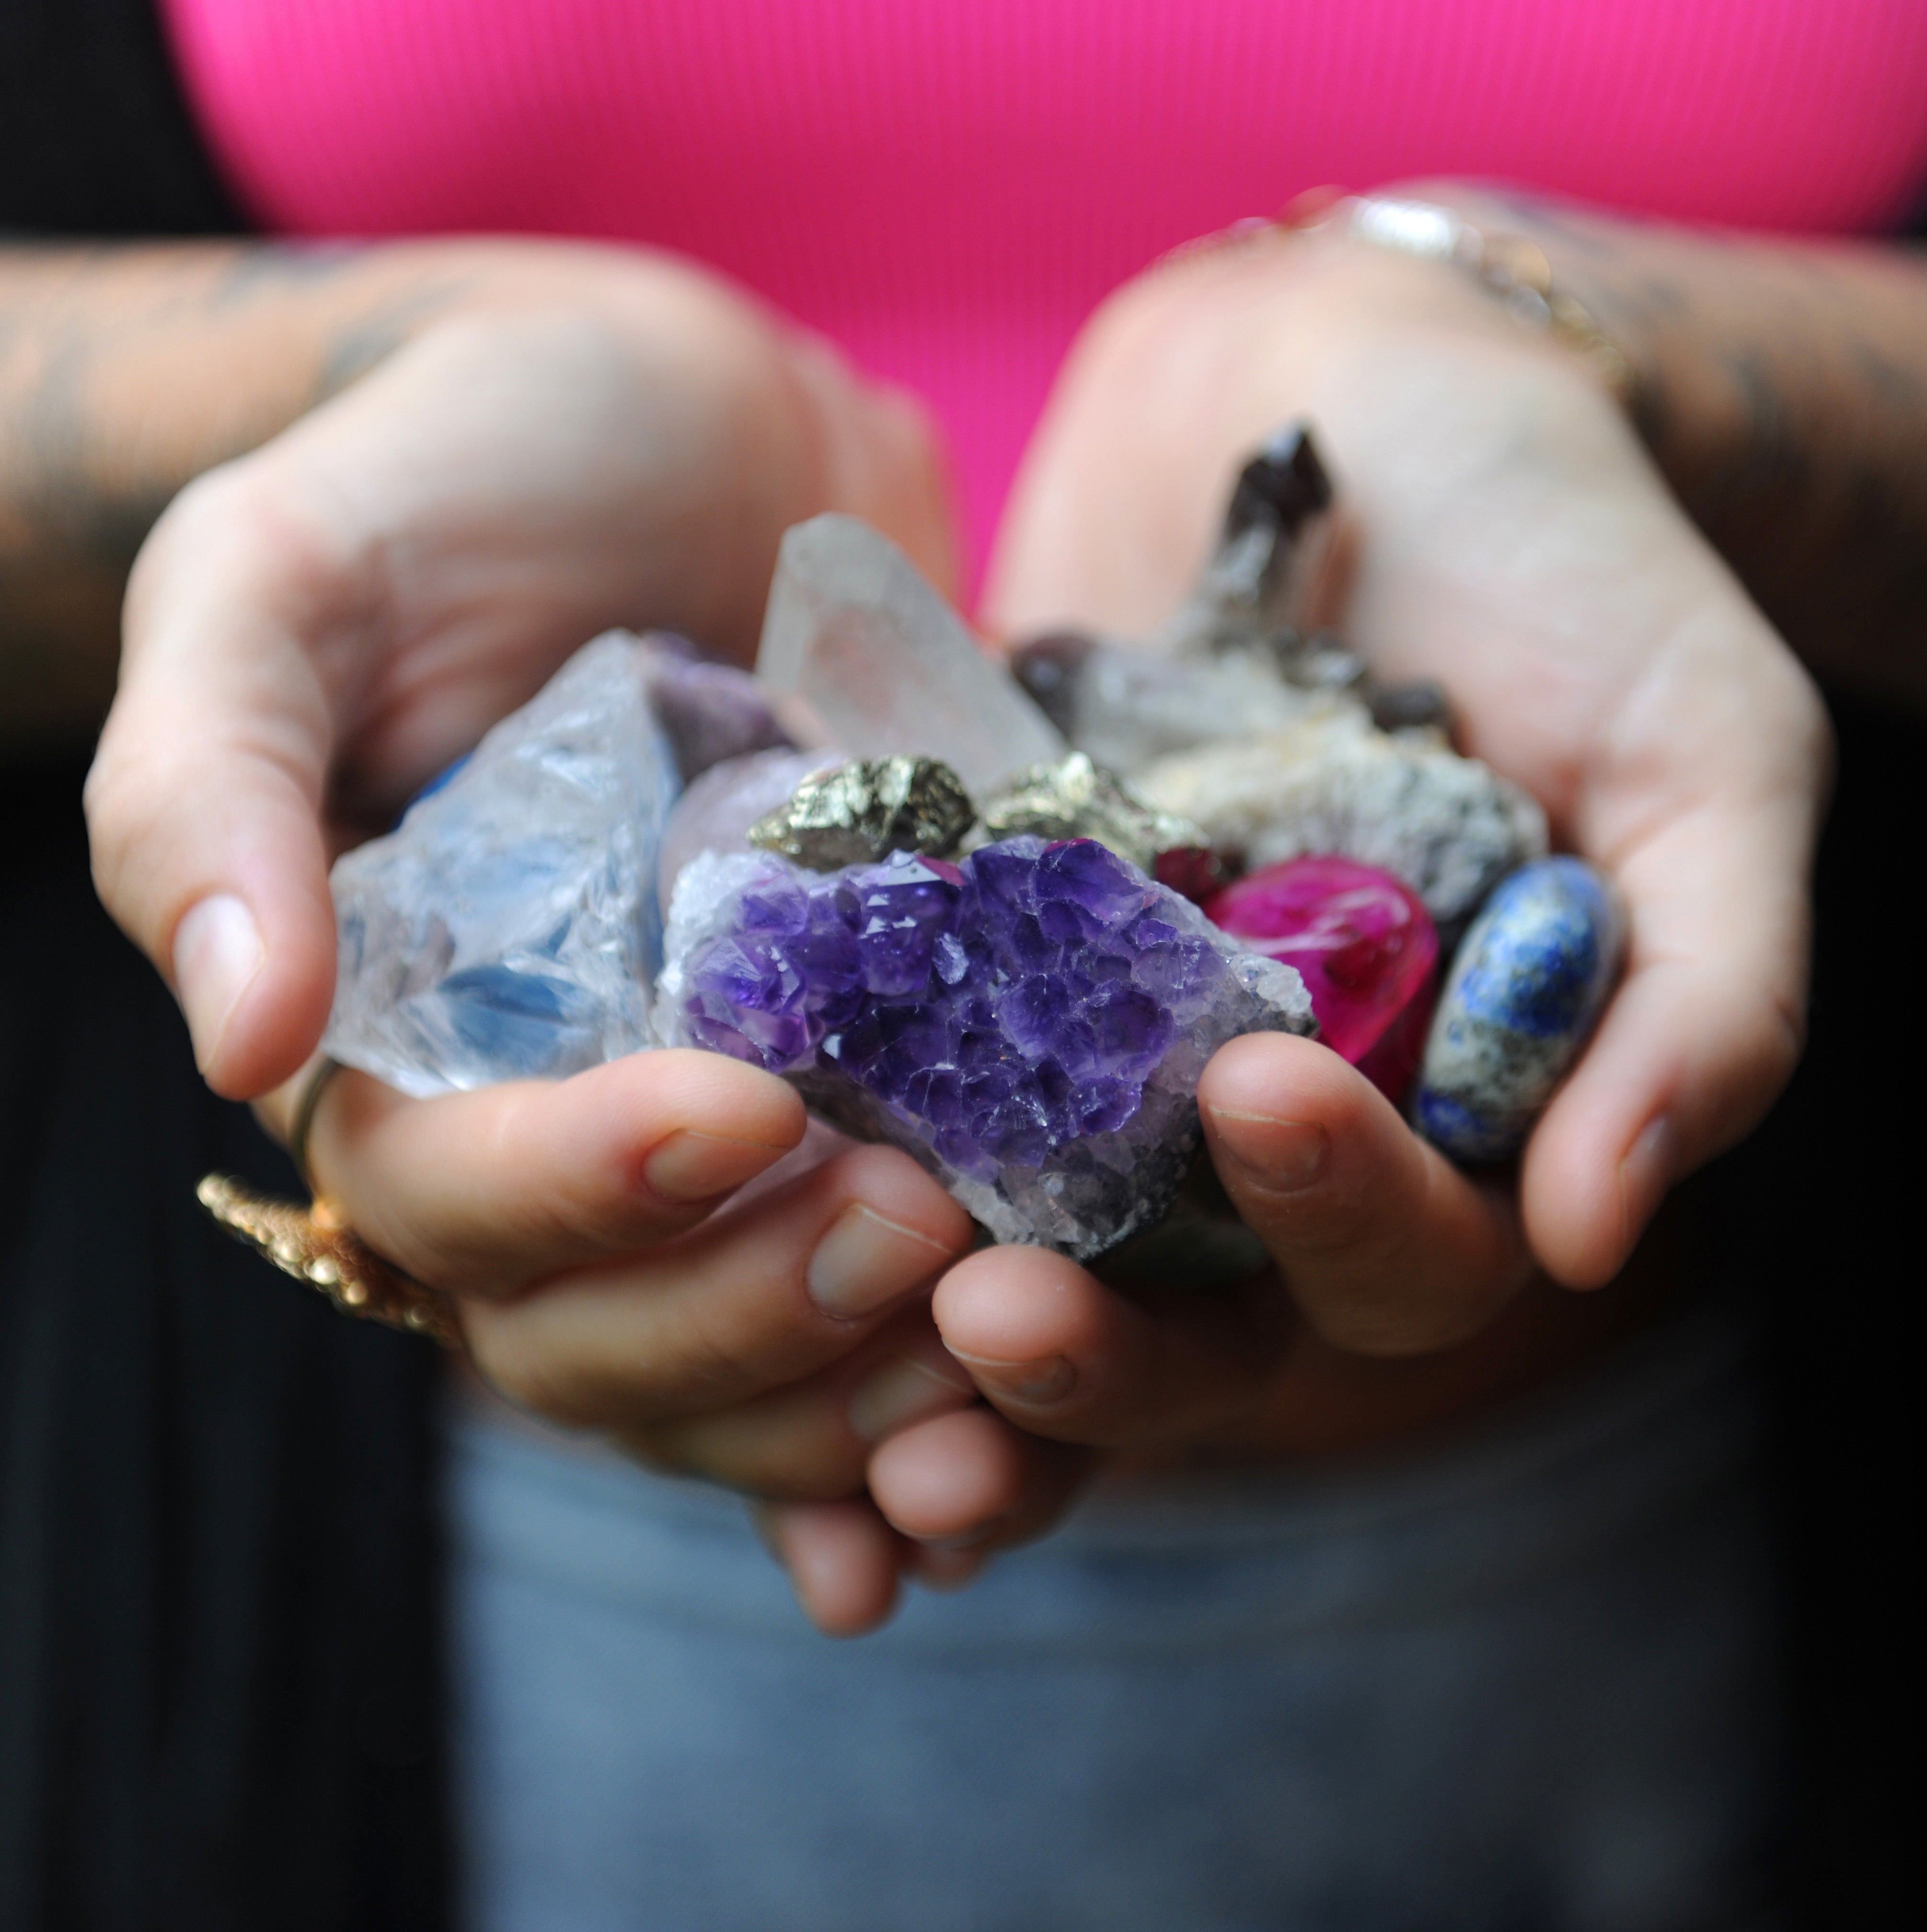 Amethyst - Protection, purification, divine connection & release of addictions